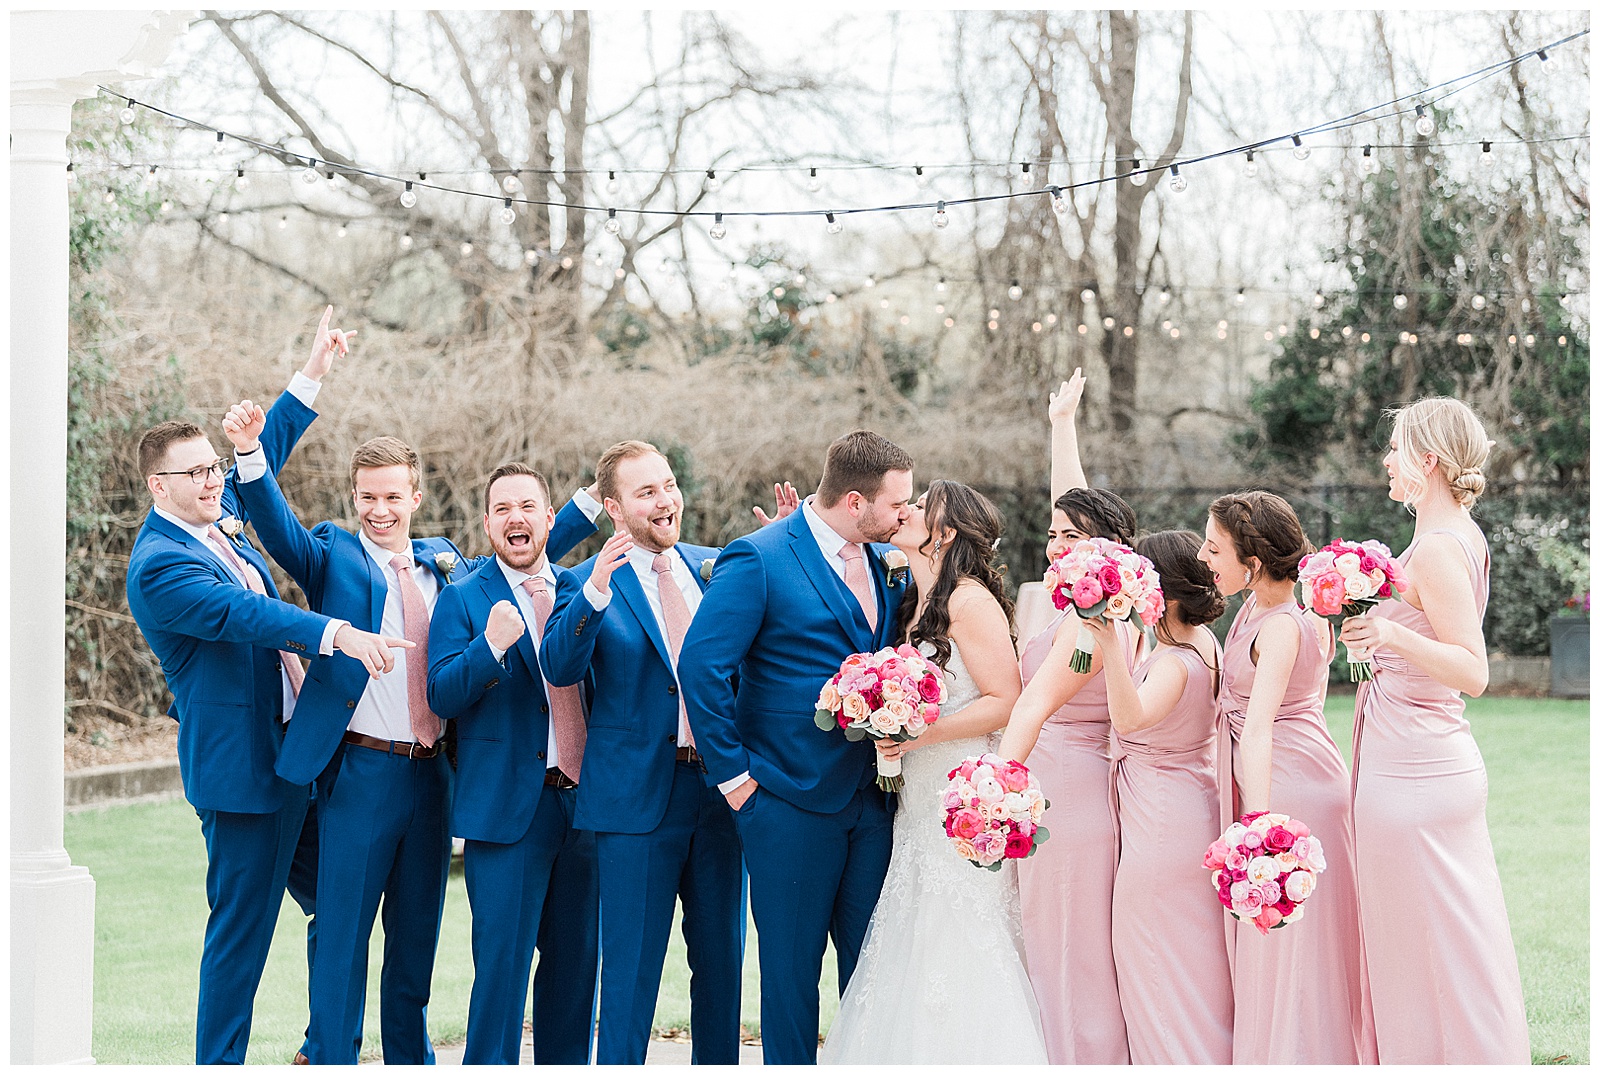 Soft Pink Navy Blue Color Theme Bridesmaid Bride Tribe and Groomsmen Group Photo from Light and Airy Outdoor Wedding at Separk Mansion in Gastonia, NC | Kevyn Dixon Photography